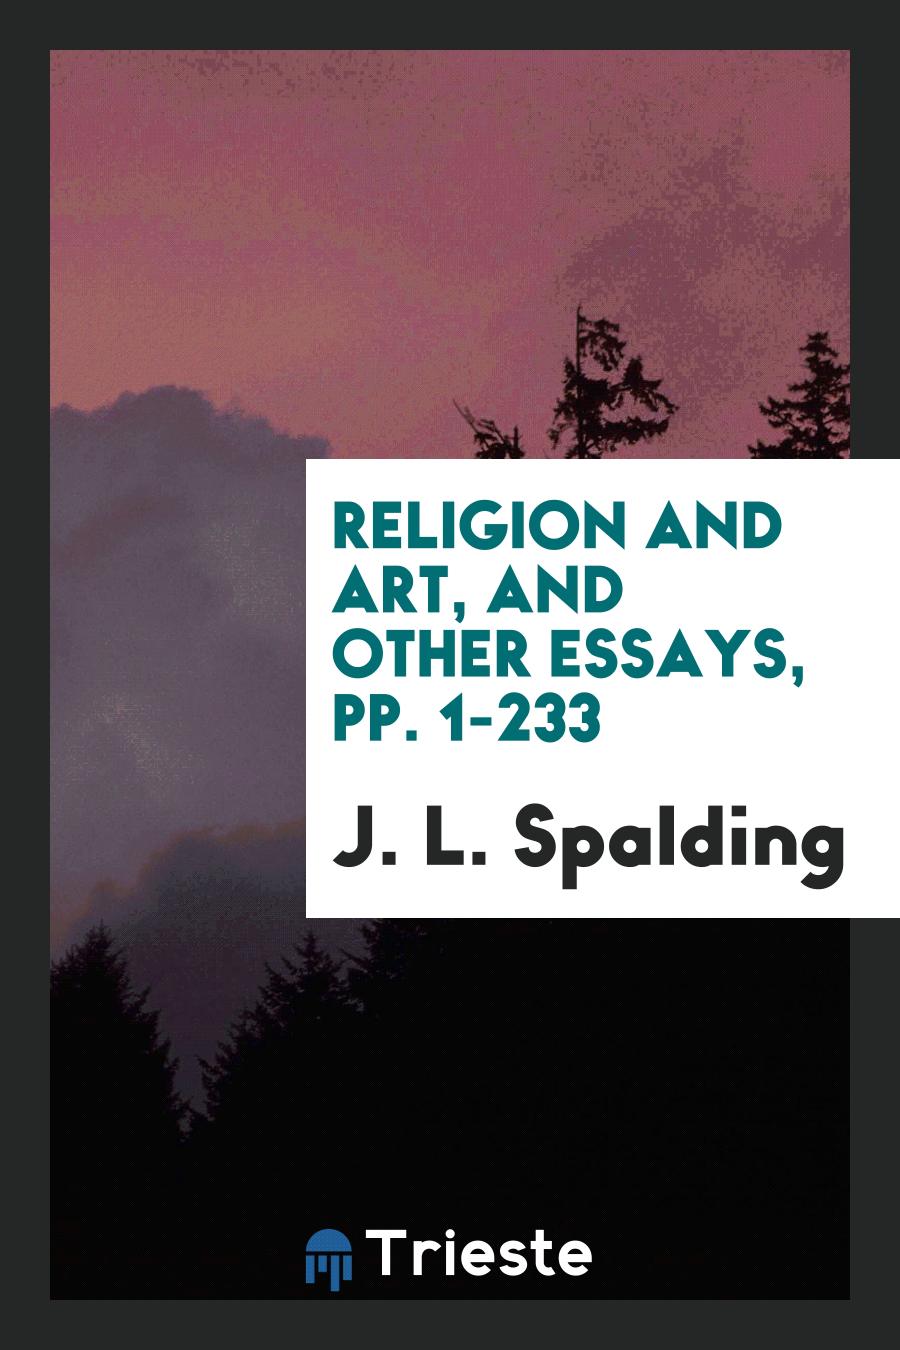 Religion and Art, and Other Essays, pp. 1-233